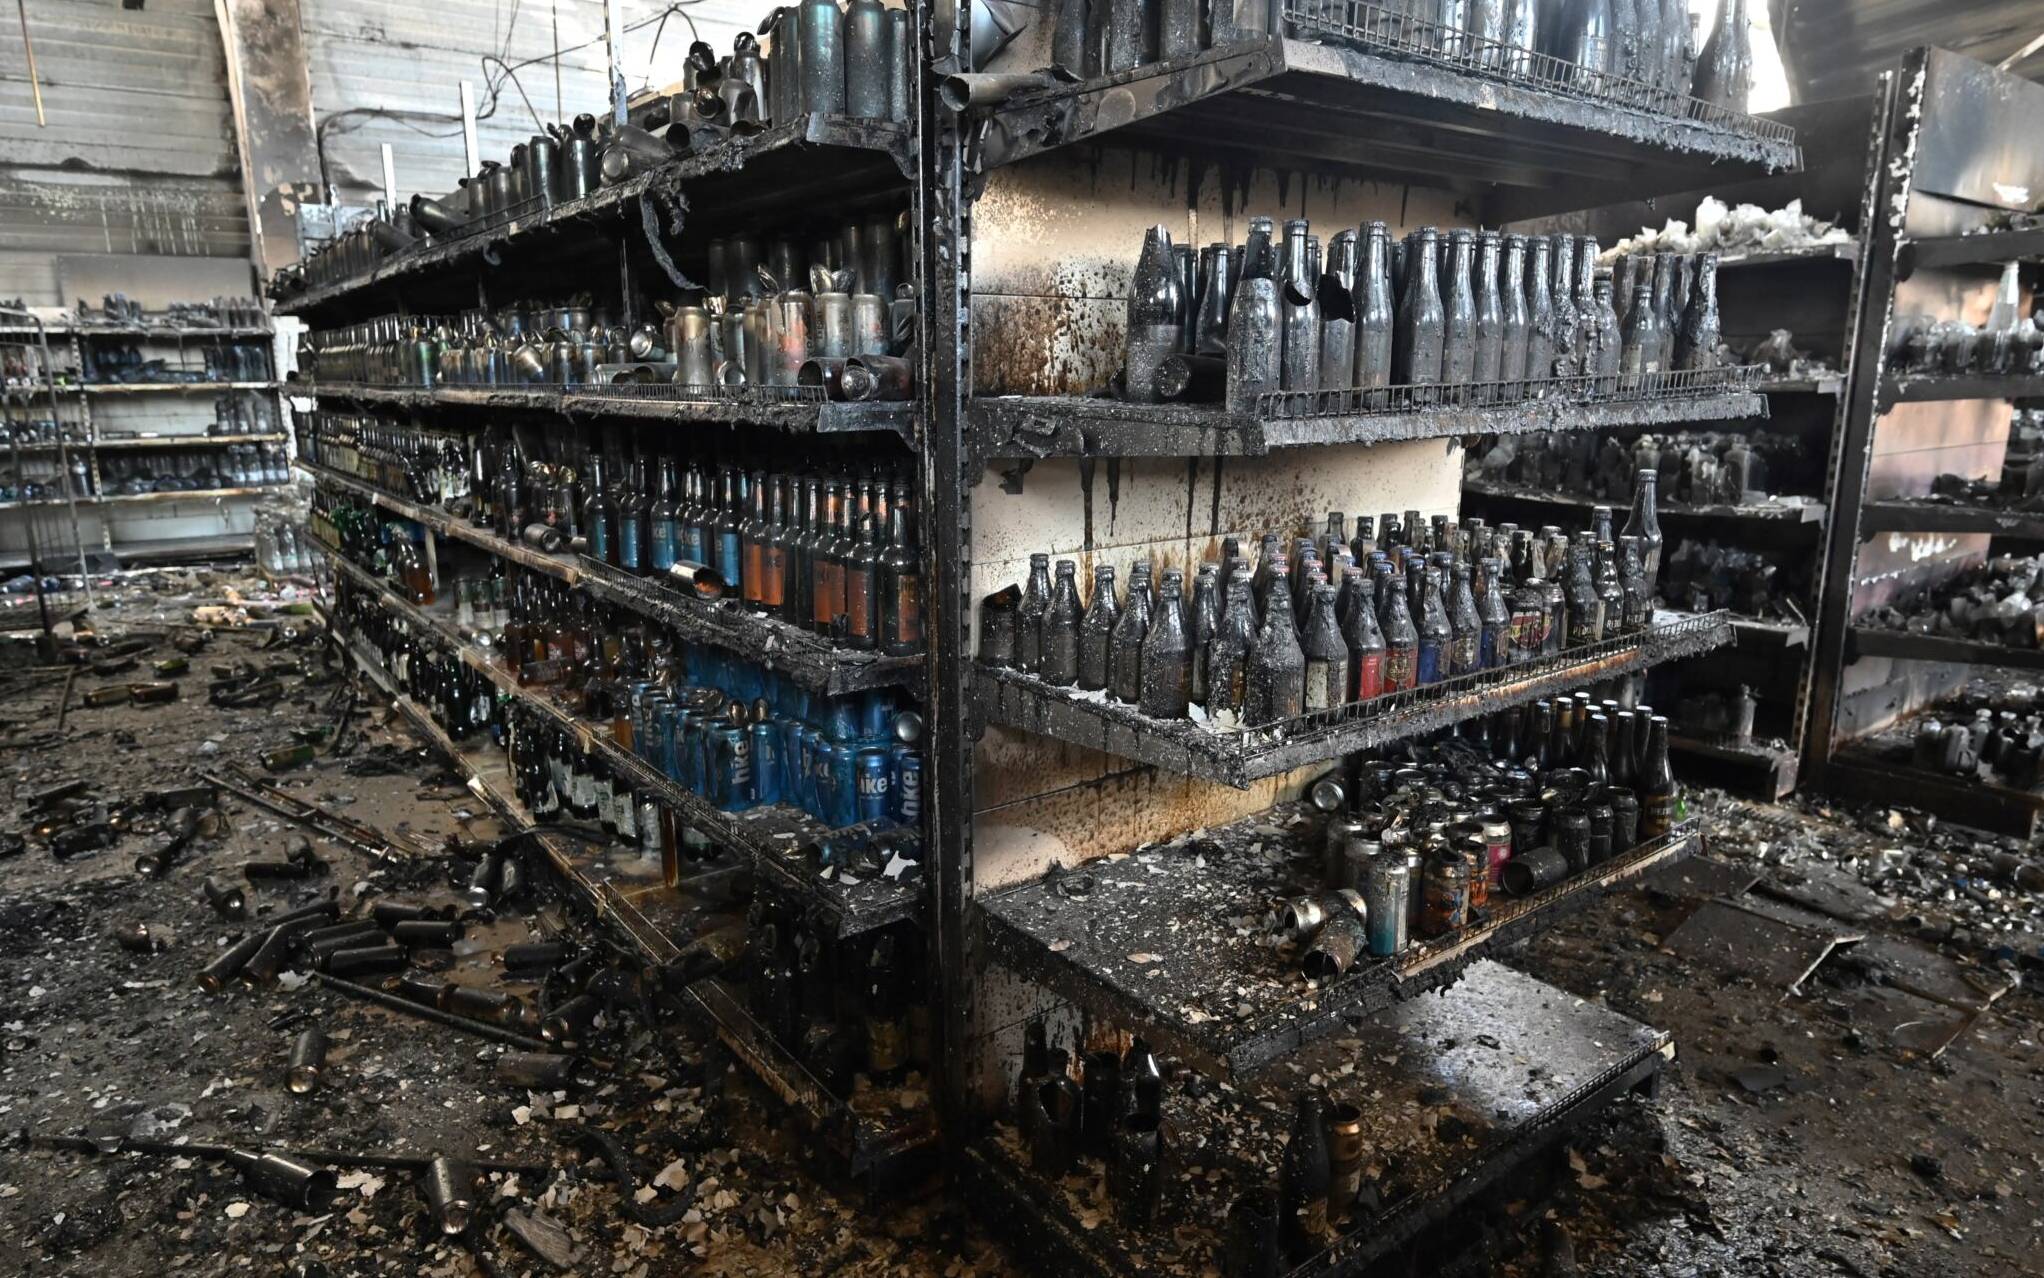 A photograph taken on June 28, 2022 shows charred goods in a grocery store of the destroyed Amstor mall in Kremenchuk, one day after it was hit by a Russian missile strike according to Ukrainian authorities. - A Russian missile strike on a crowded mall in central Ukraine killed at least 18 people in what Group of Seven leaders branded "a war crime" at a meeting in Germany where they looked to step up sanctions on Moscow. The leaders vowed that Russian President and those responsible would be held to account for June 27's strike in the city of Kremenchuk, carried out during the shopping mall's busiest hours. (Photo by Genya SAVILOV / AFP)